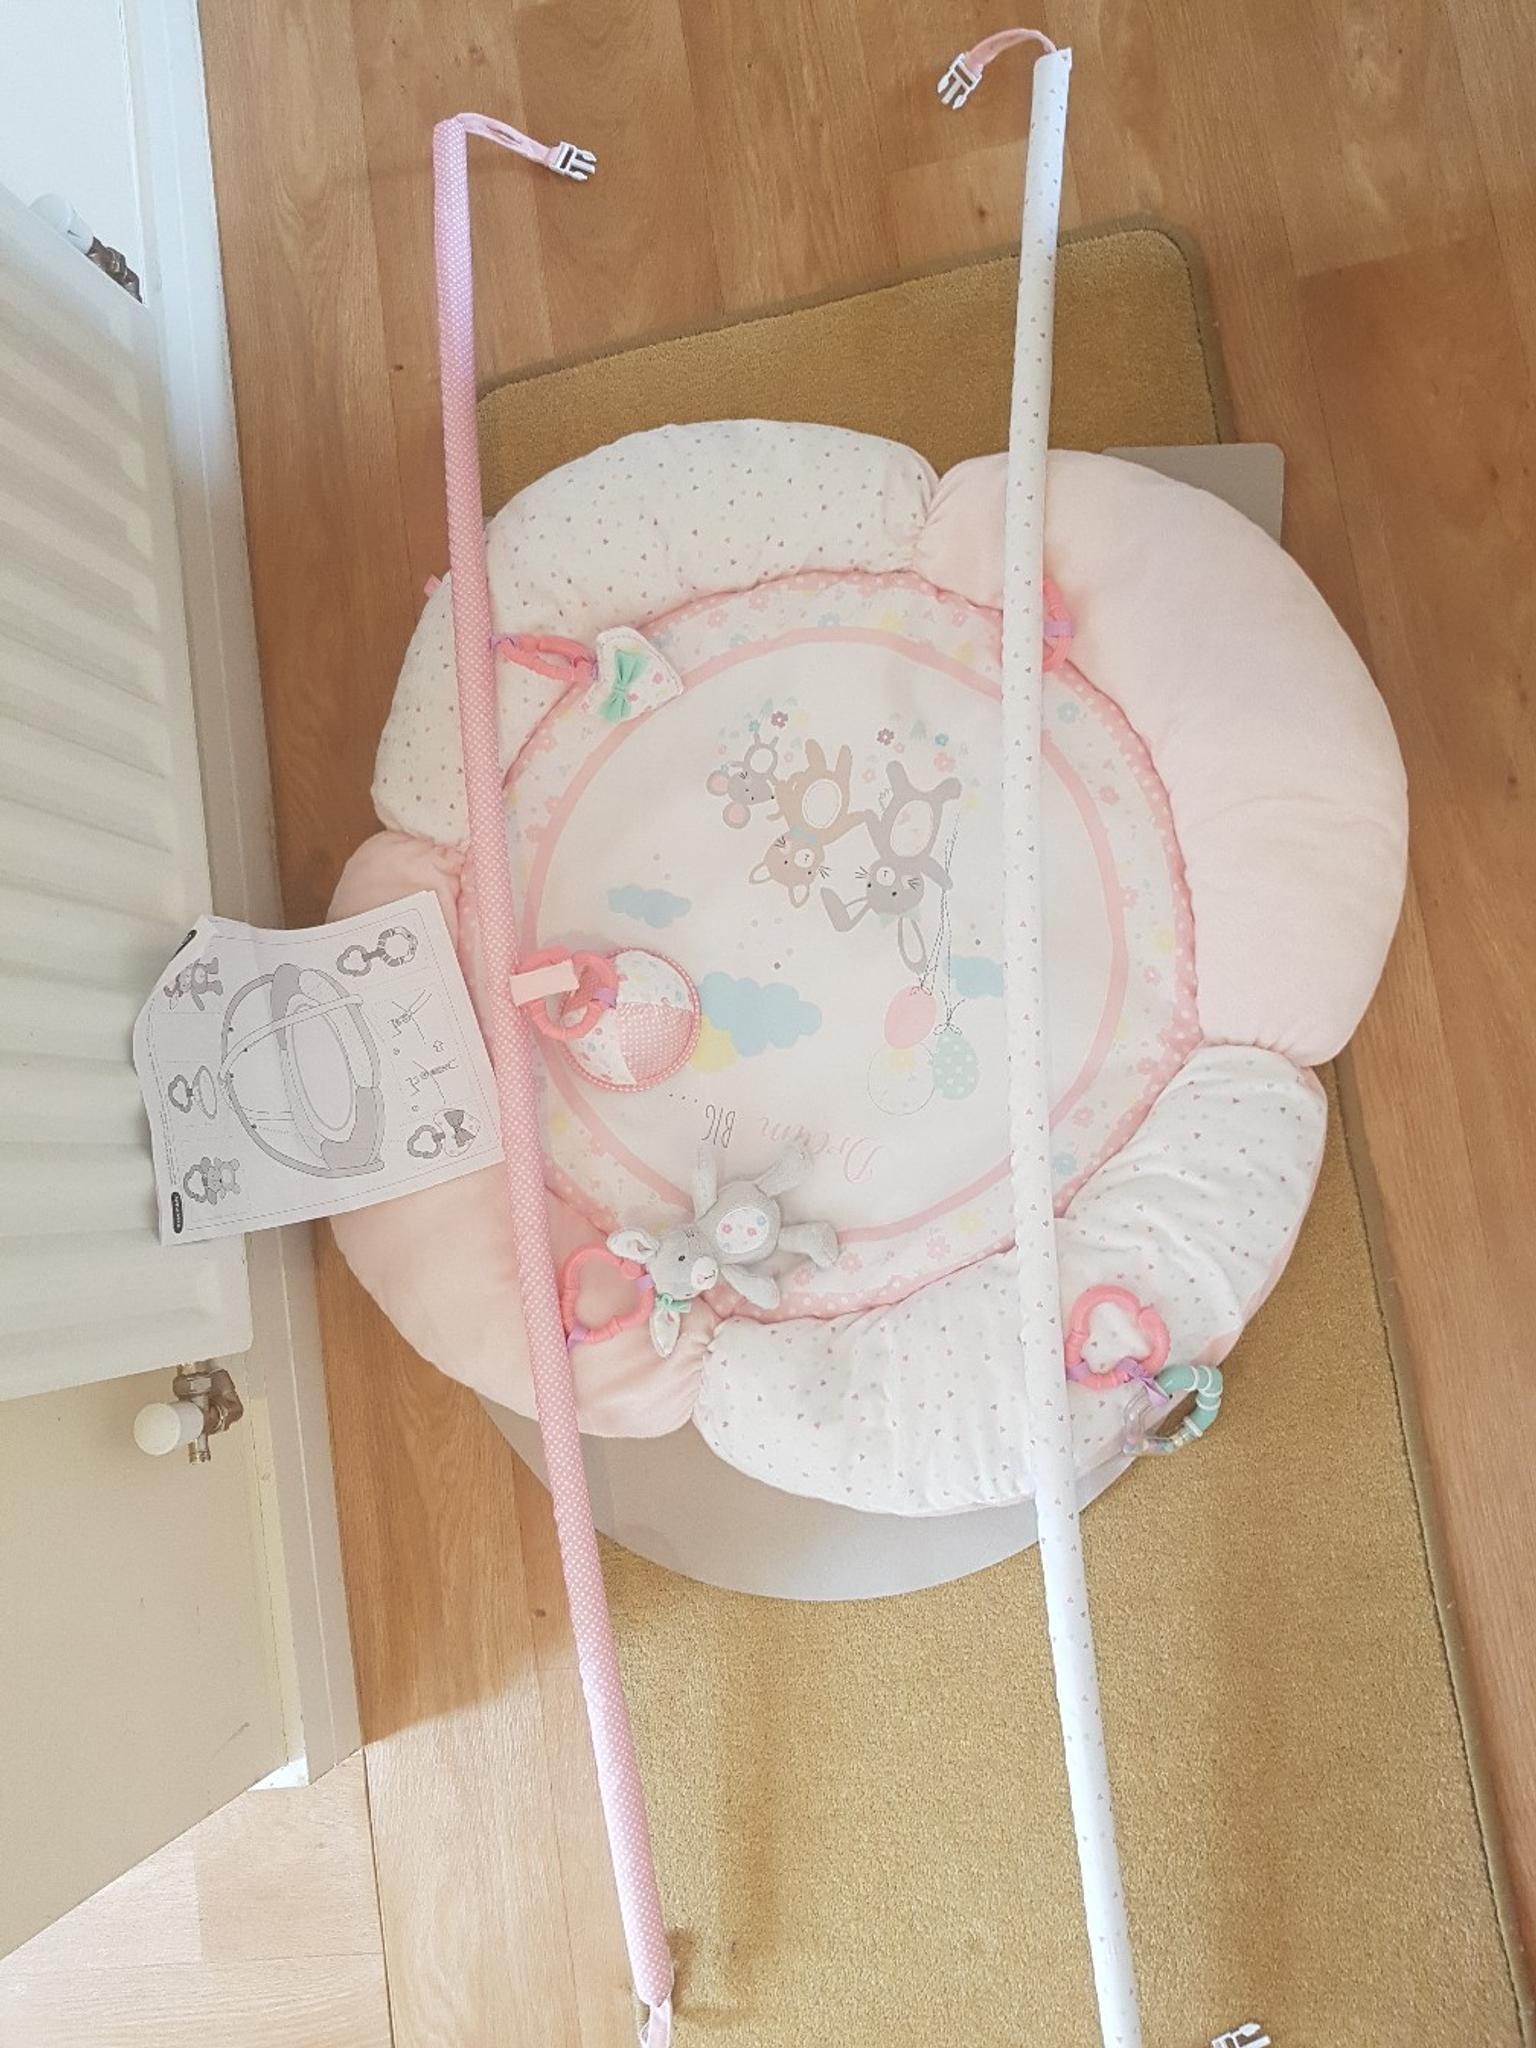 Mothercare Beautiful Baby Girl Play Mat In Le67 Leicestershire